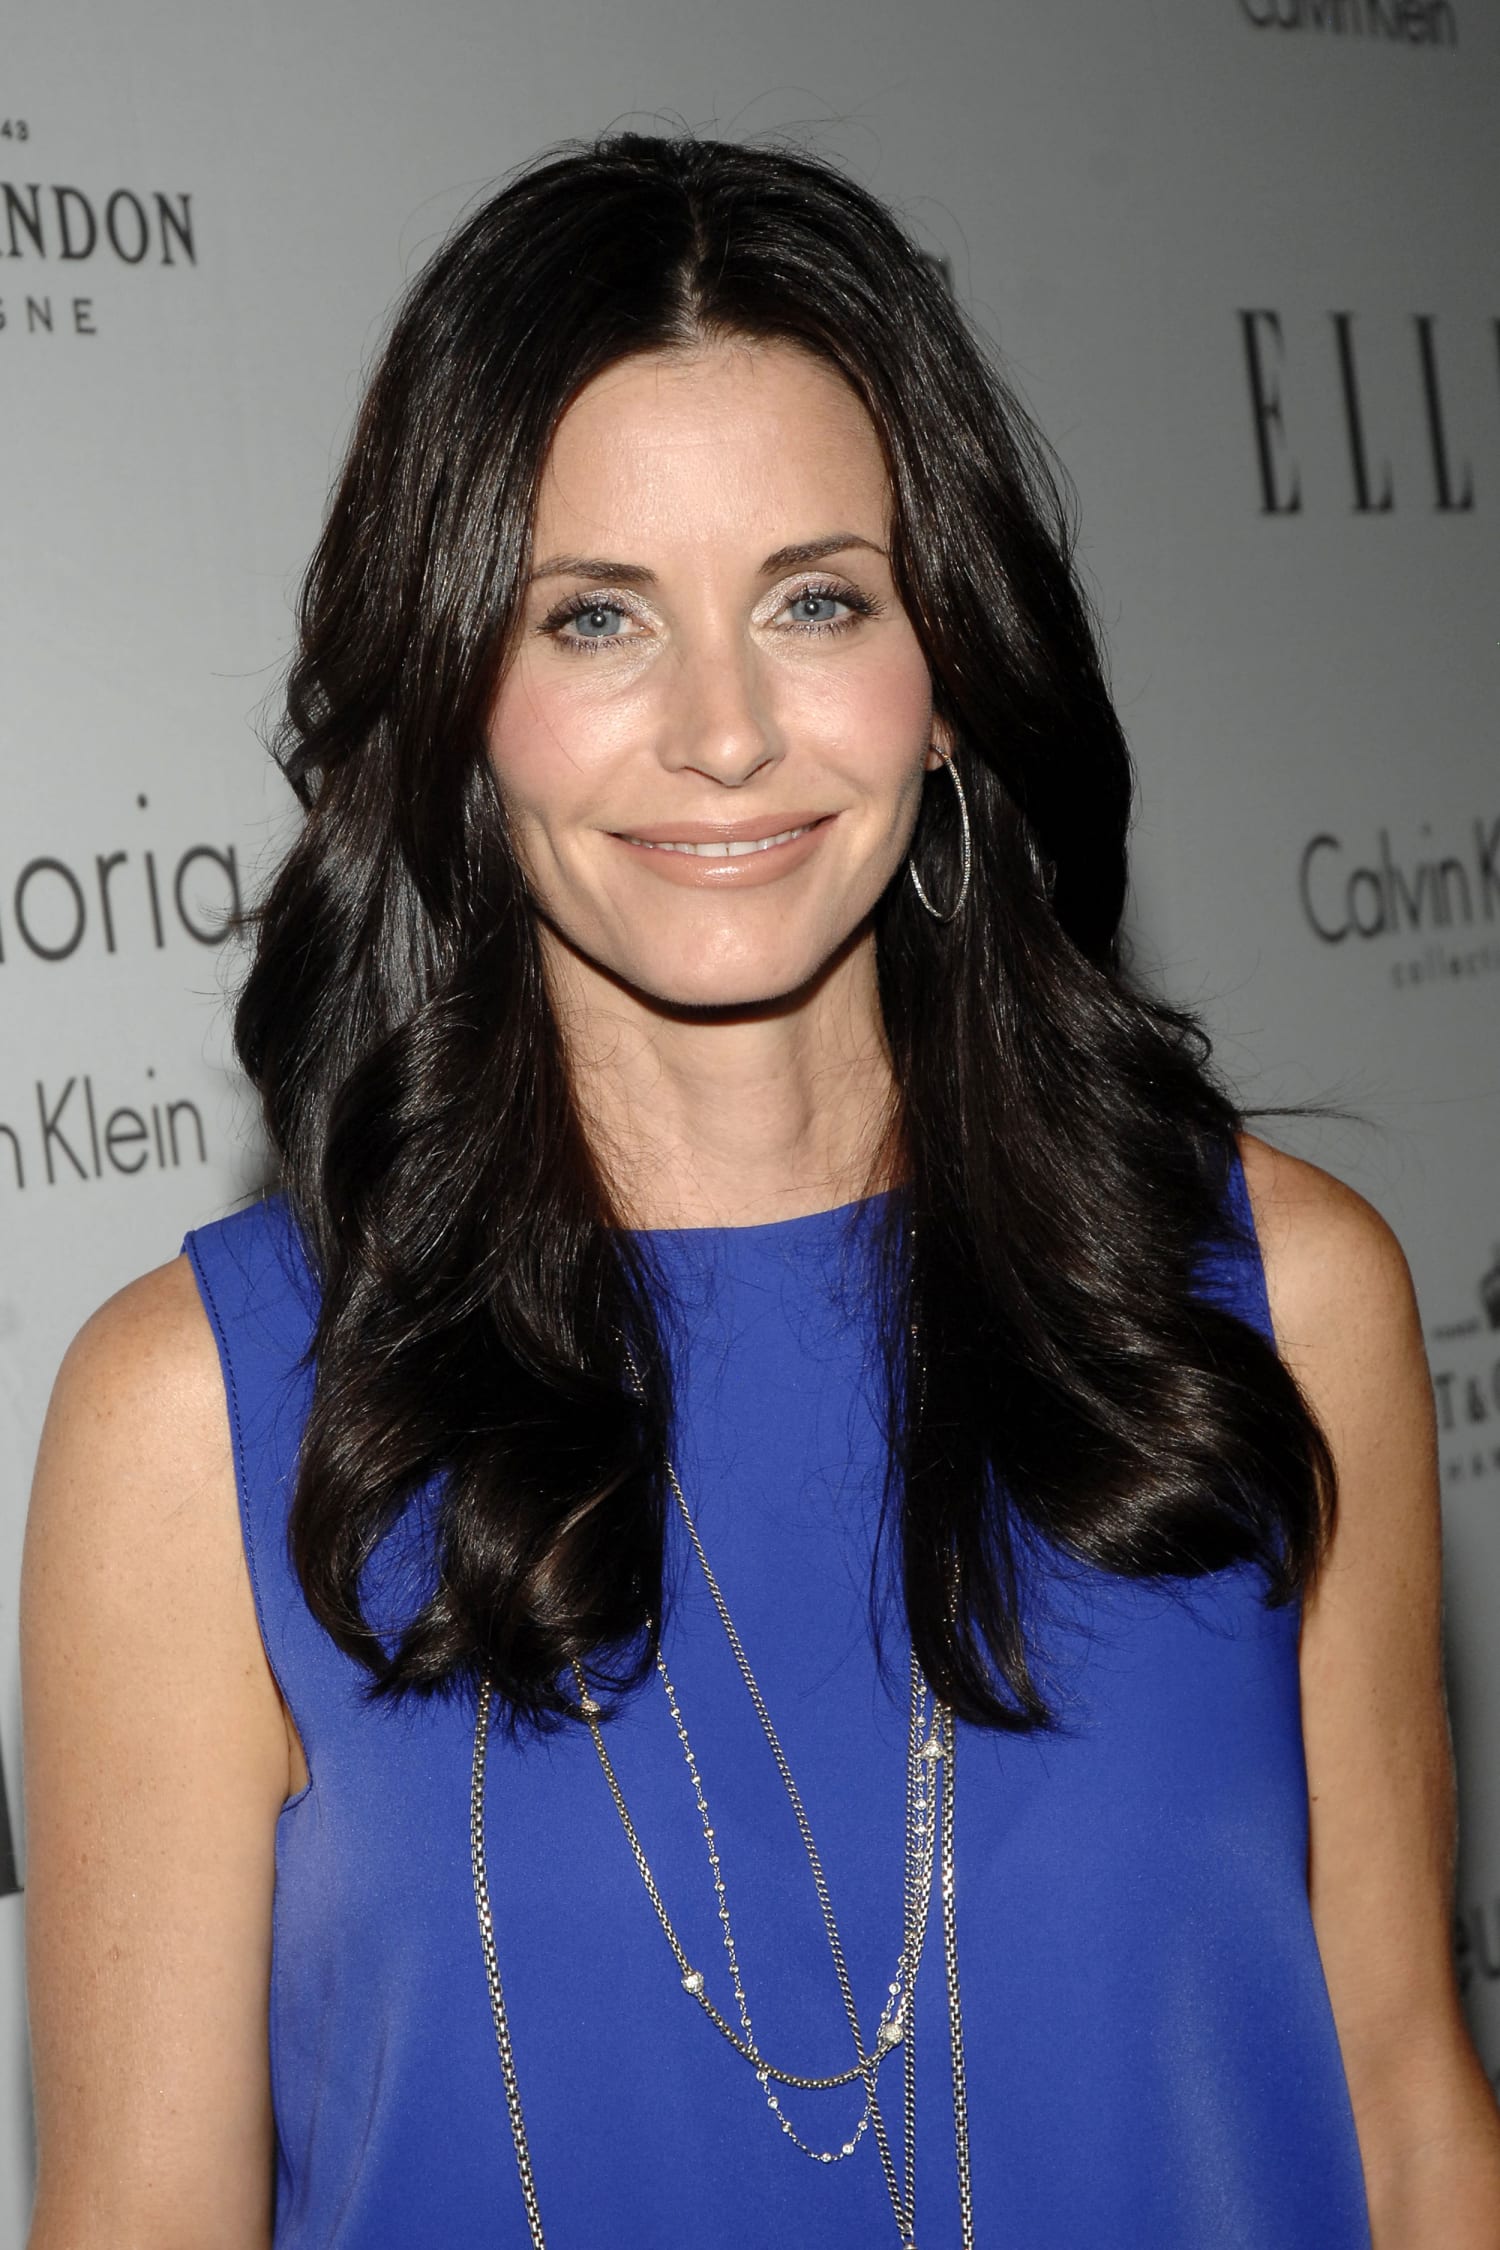 Courteney Cox Pokes Fun At Past Hairstyles: 'Embarrassing'